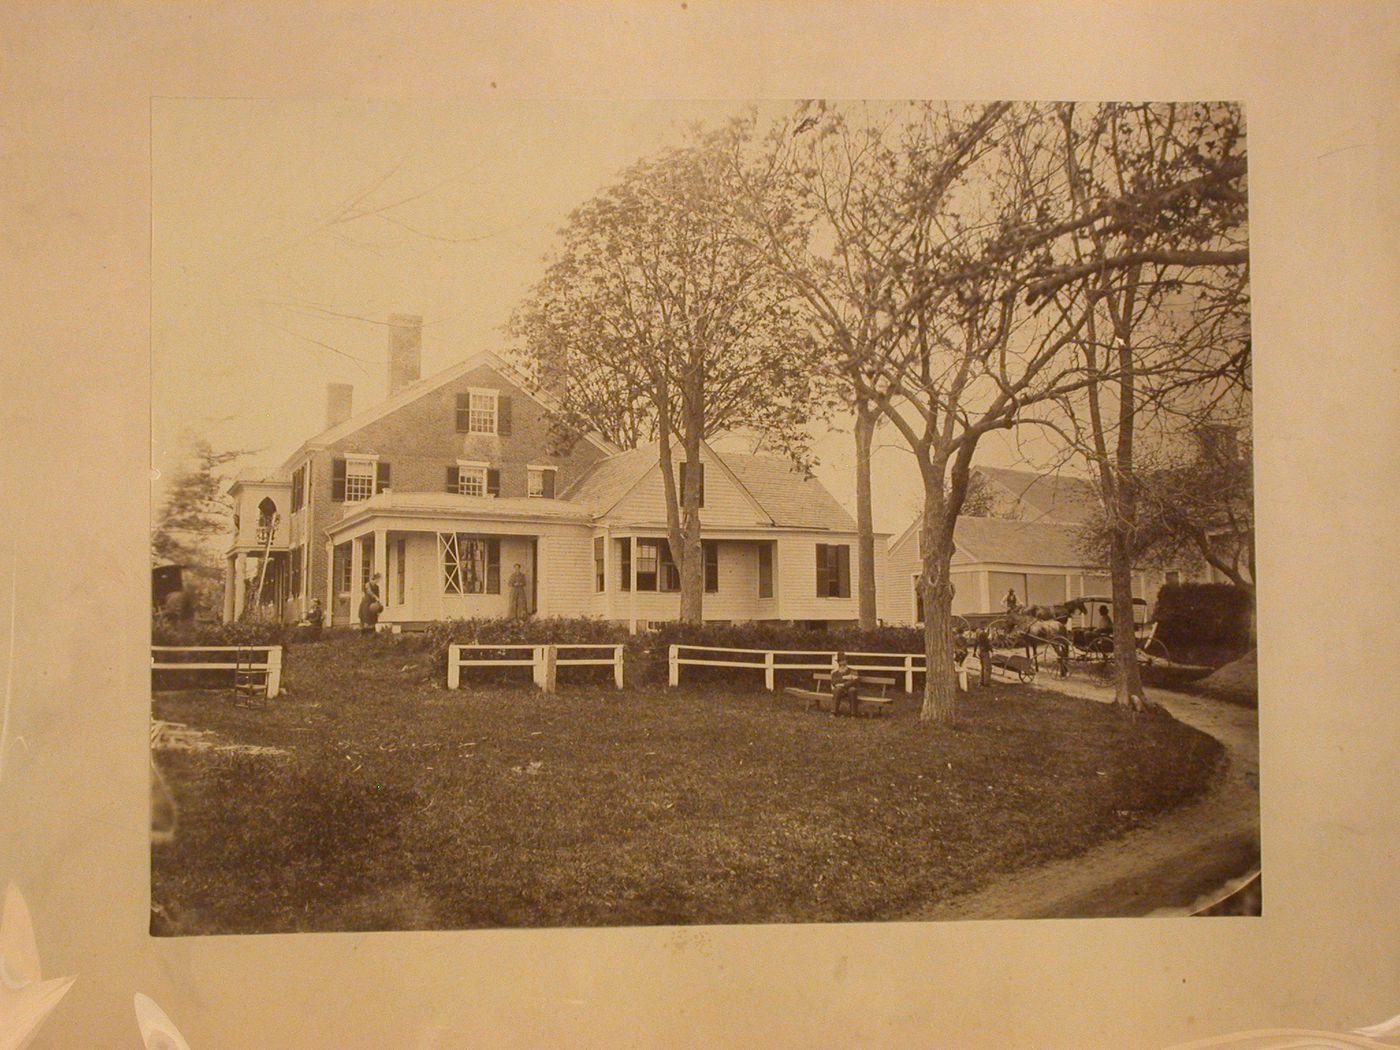 Brick house and barns, with figures in yard and driveway, Boston, Massachusetts